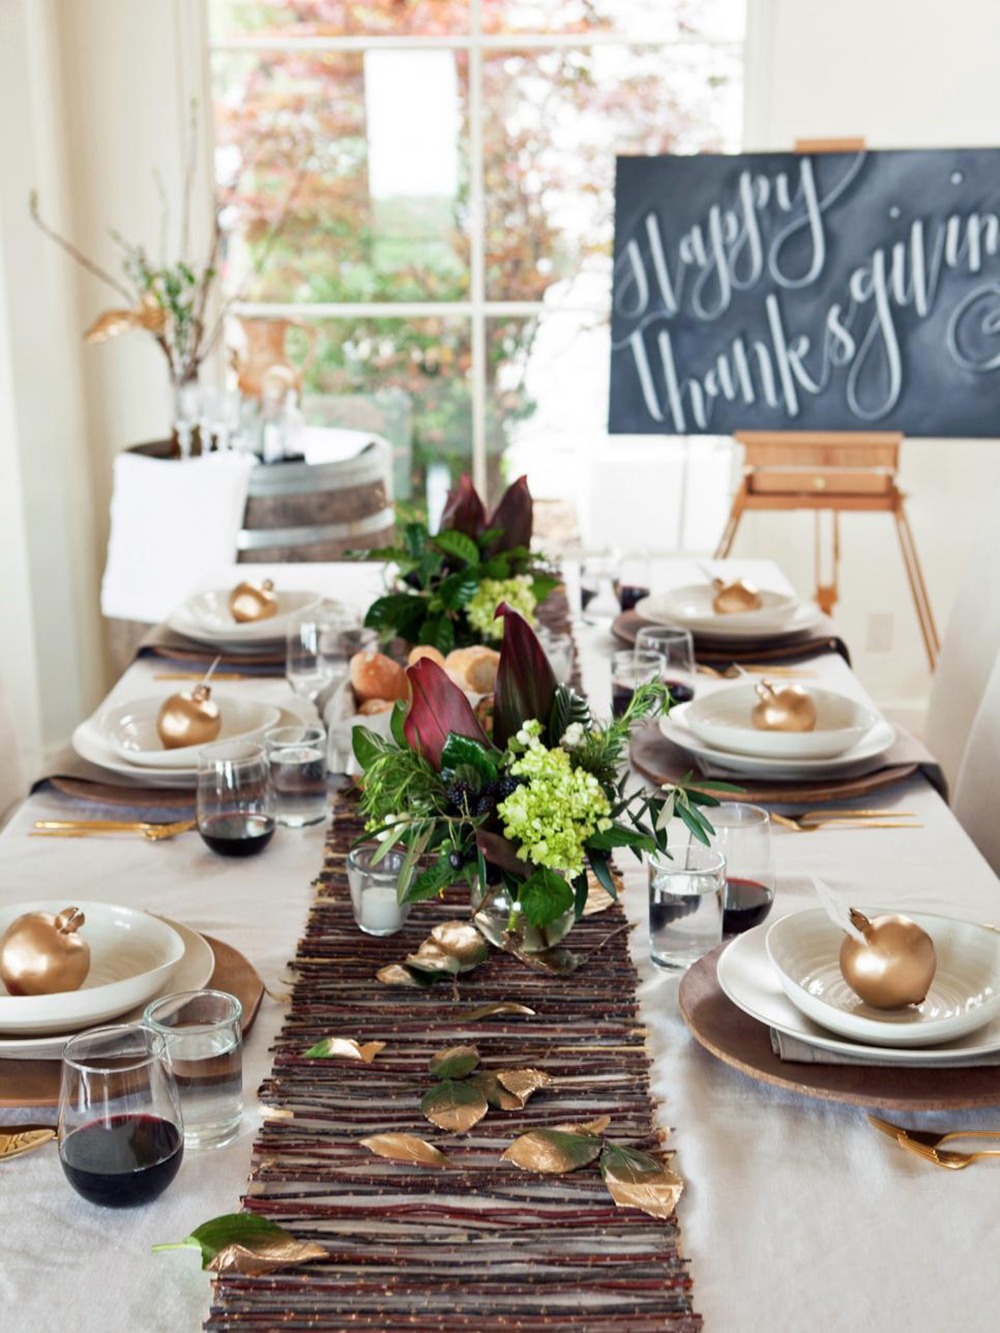 original_camille-styles-thanksgiving-table-setting